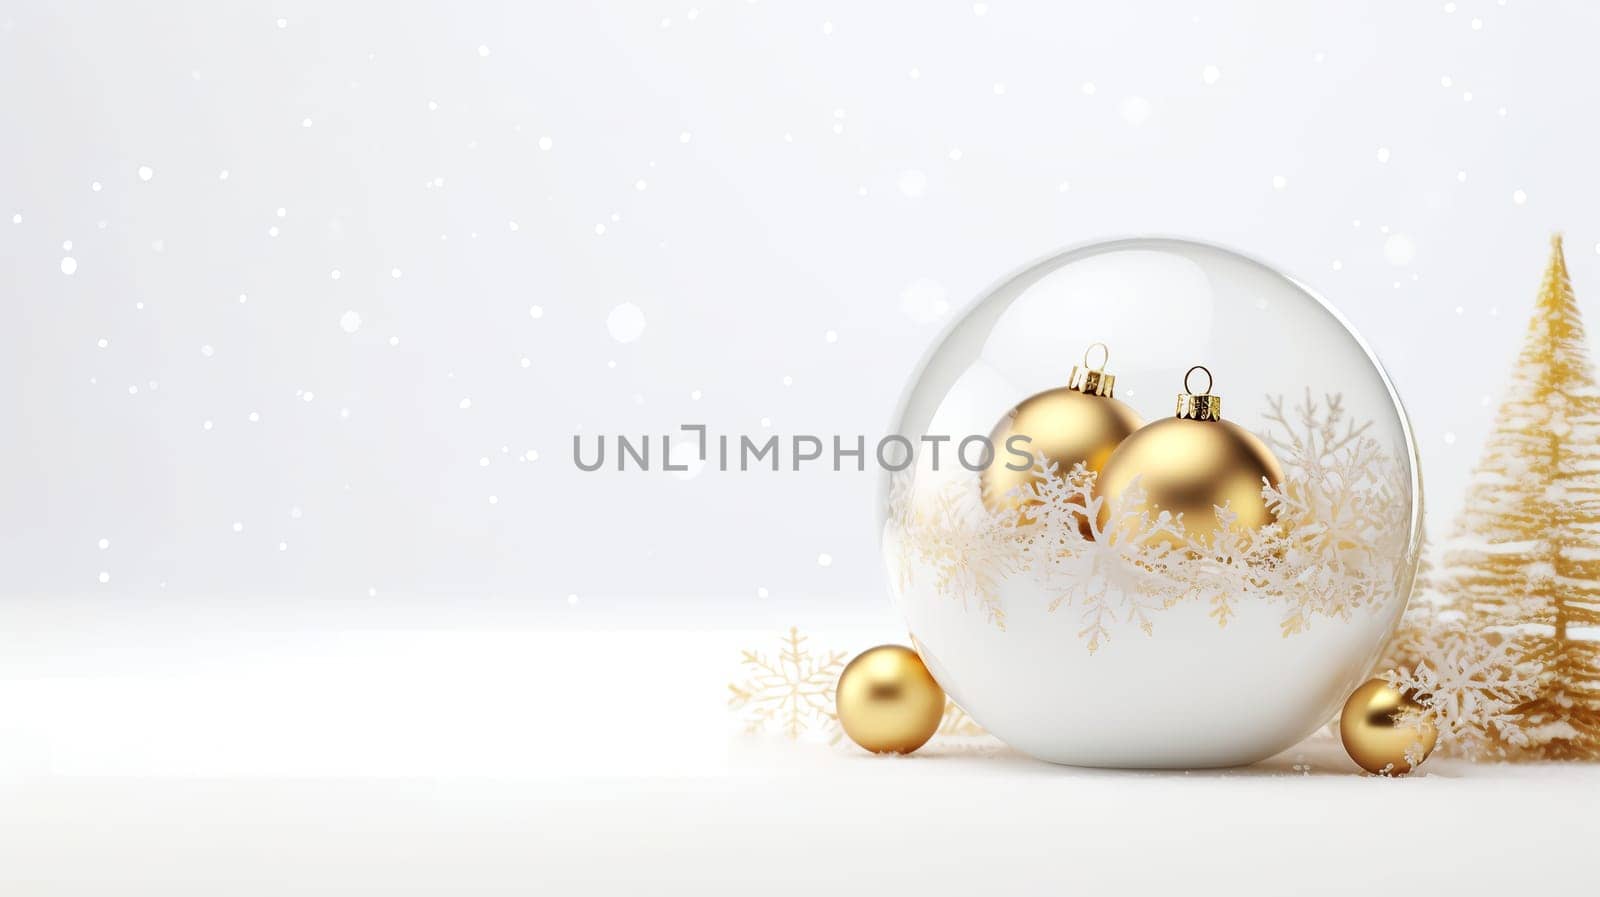 Luxurious Christmas decorations with glass balls by AndreyKENO